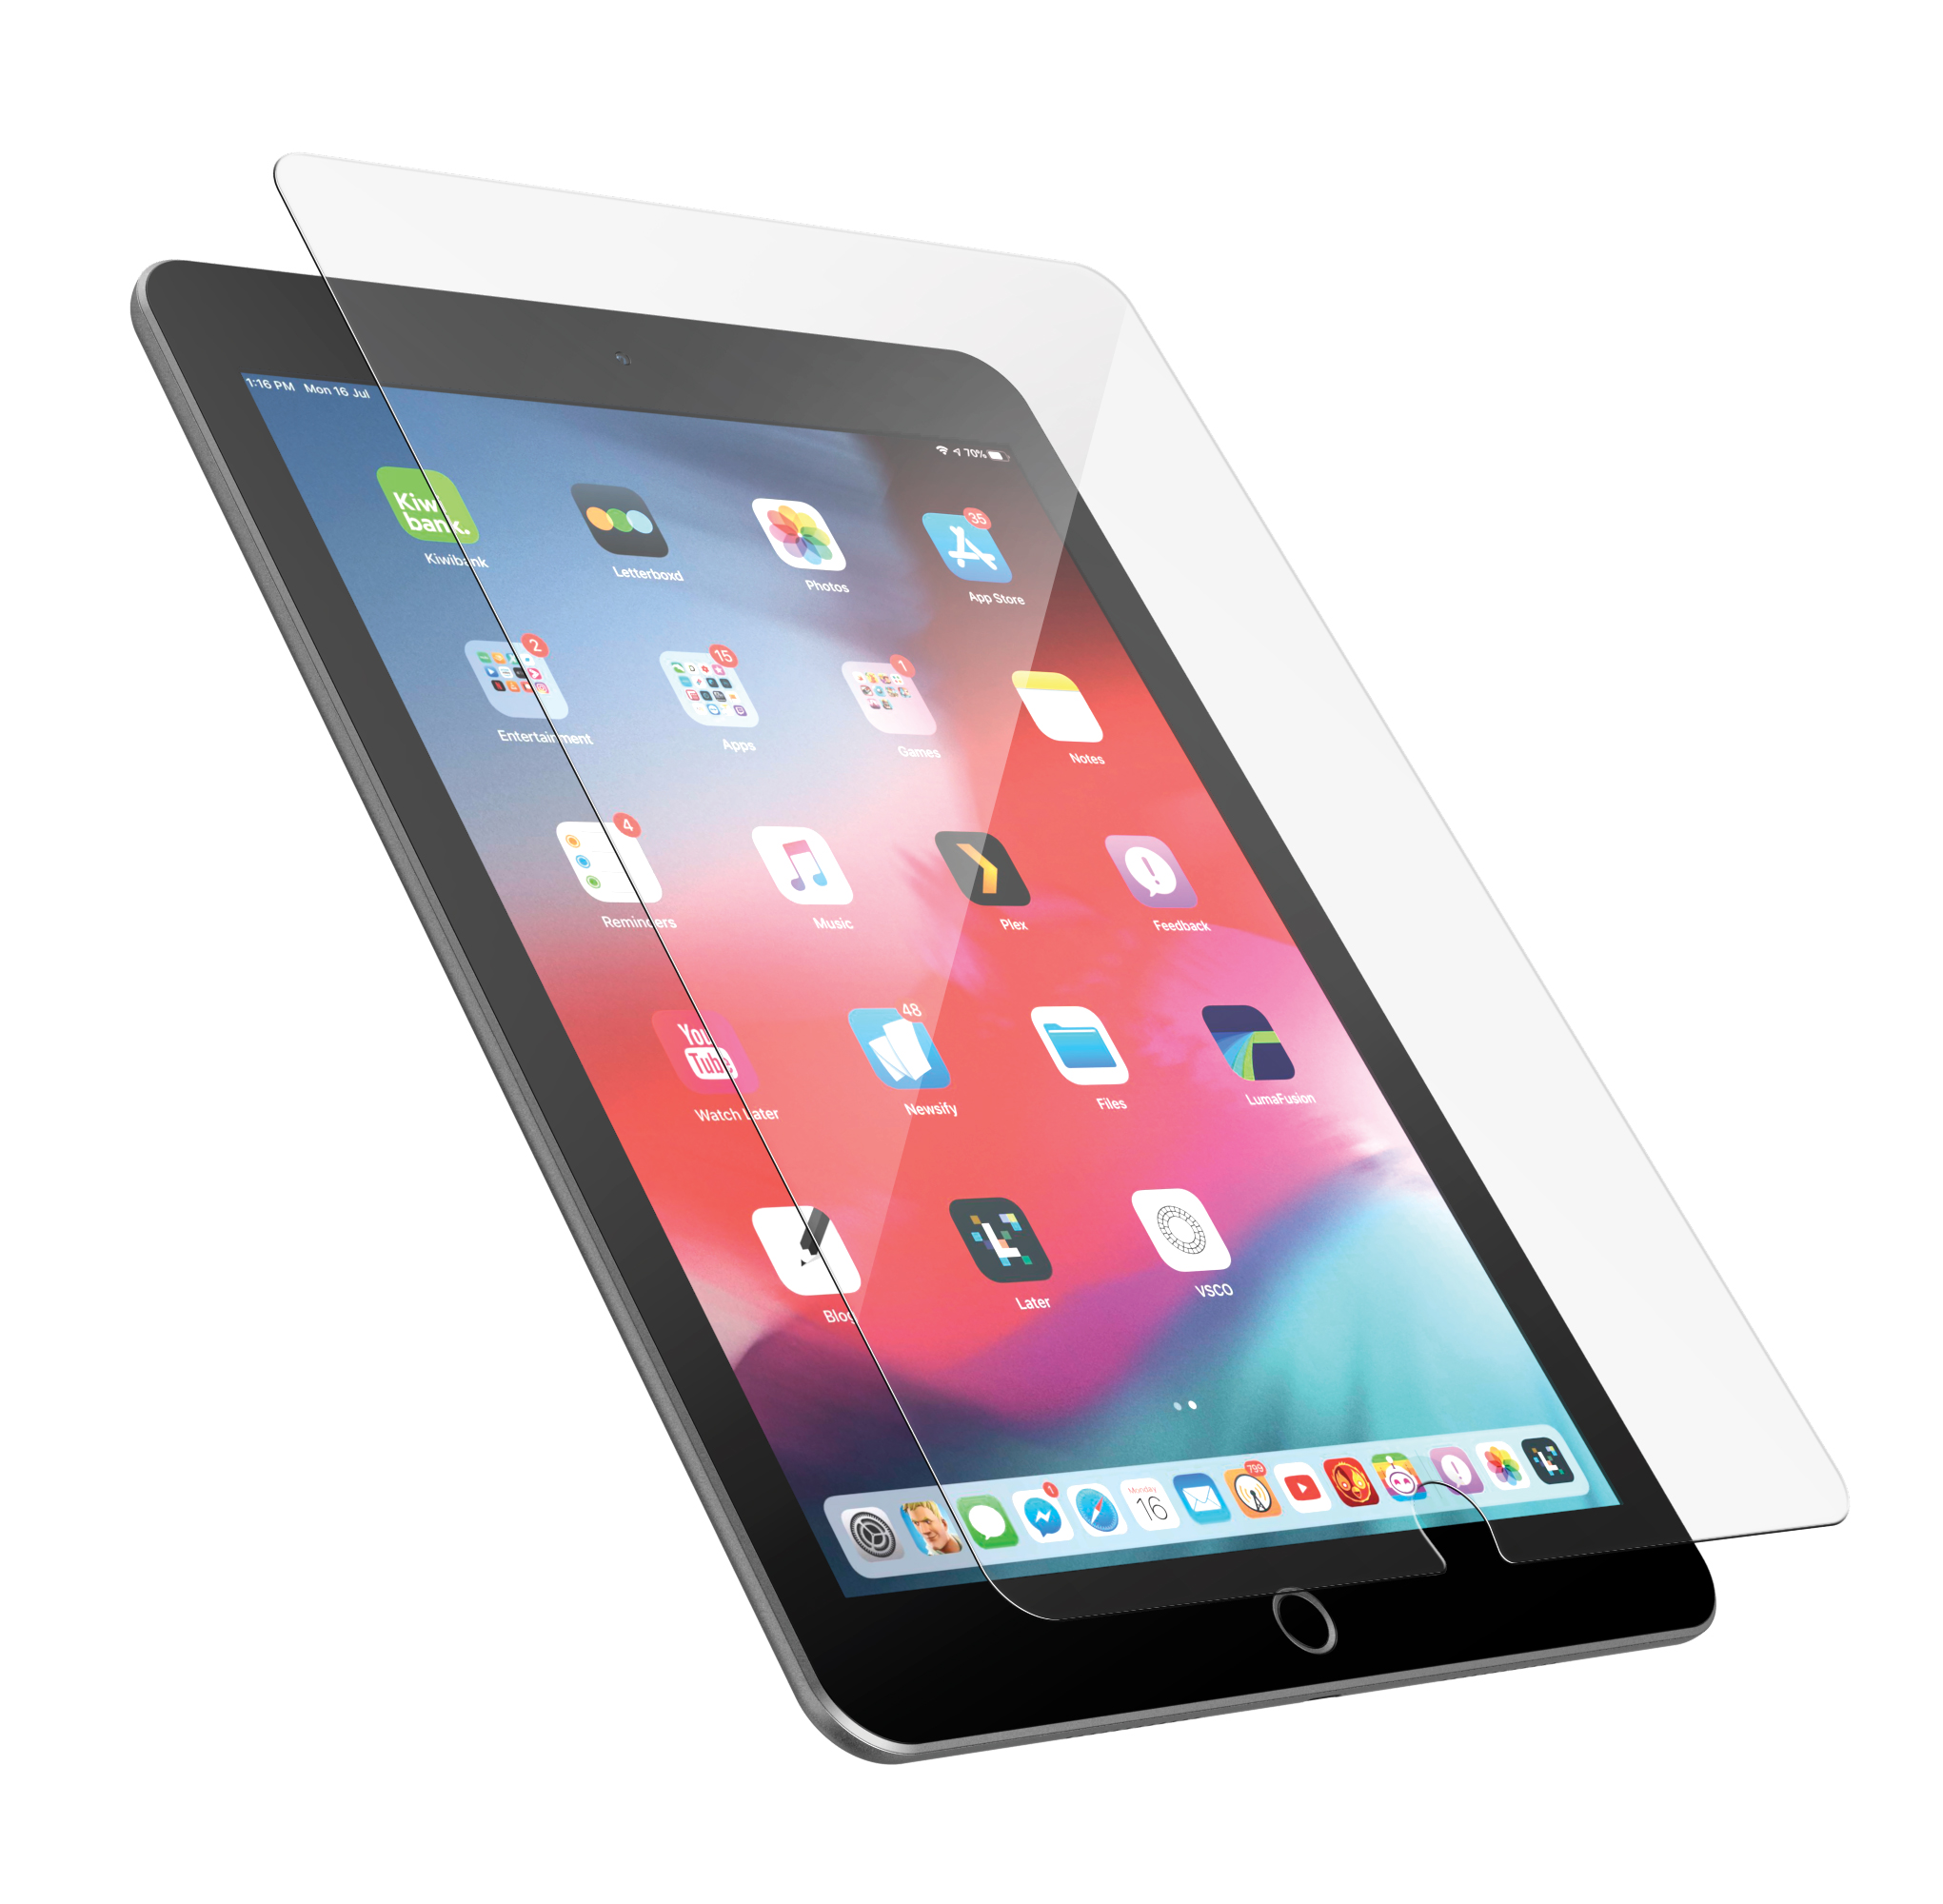 Base Tempered Glass Screen Protector for iPad Pro (5th/4th/3rd Gen)